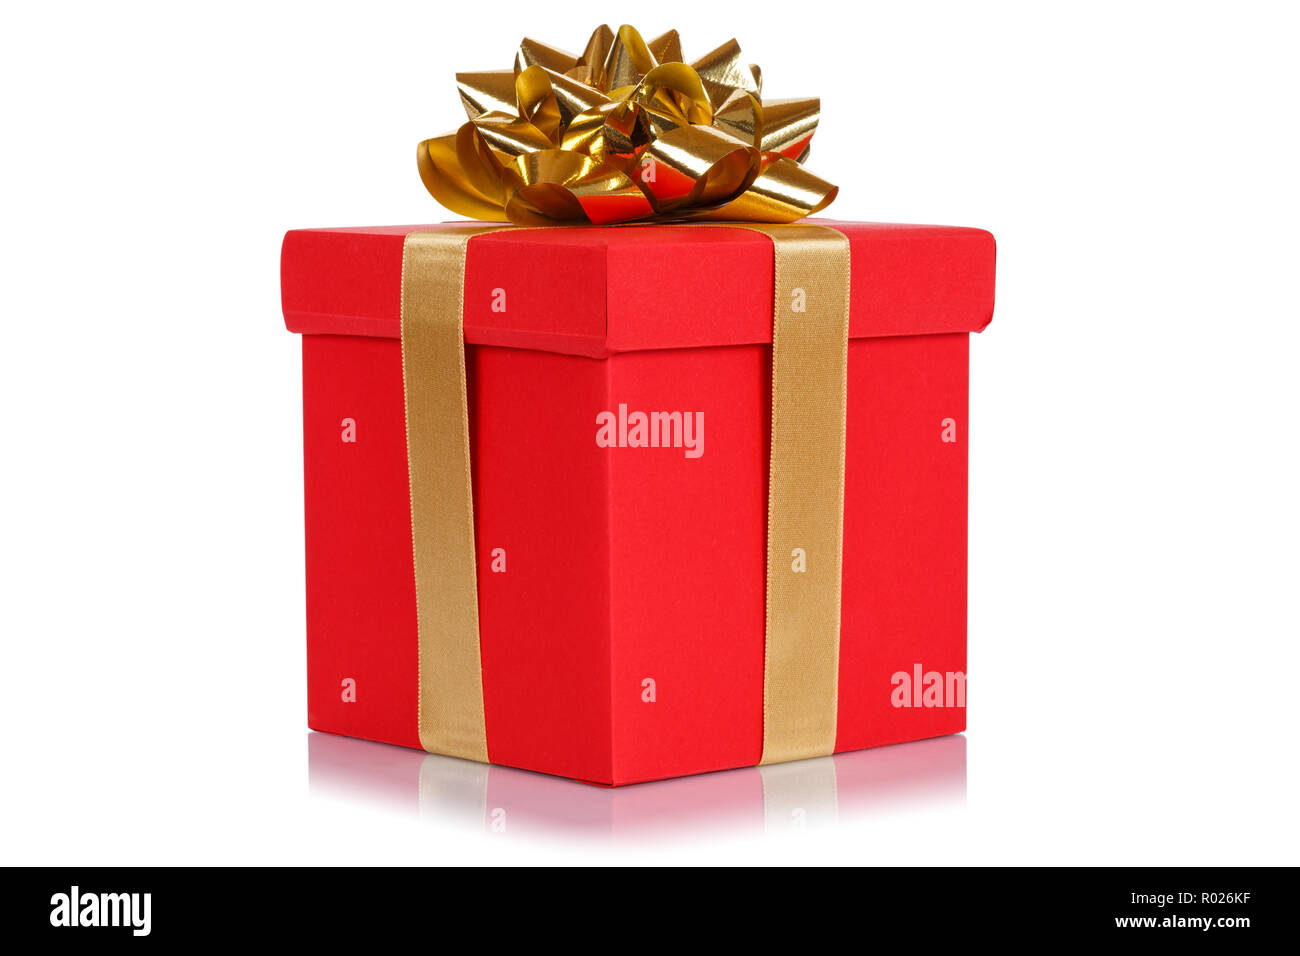 Gift present christmas birthday wedding wish red box isolated on a white background Stock Photo